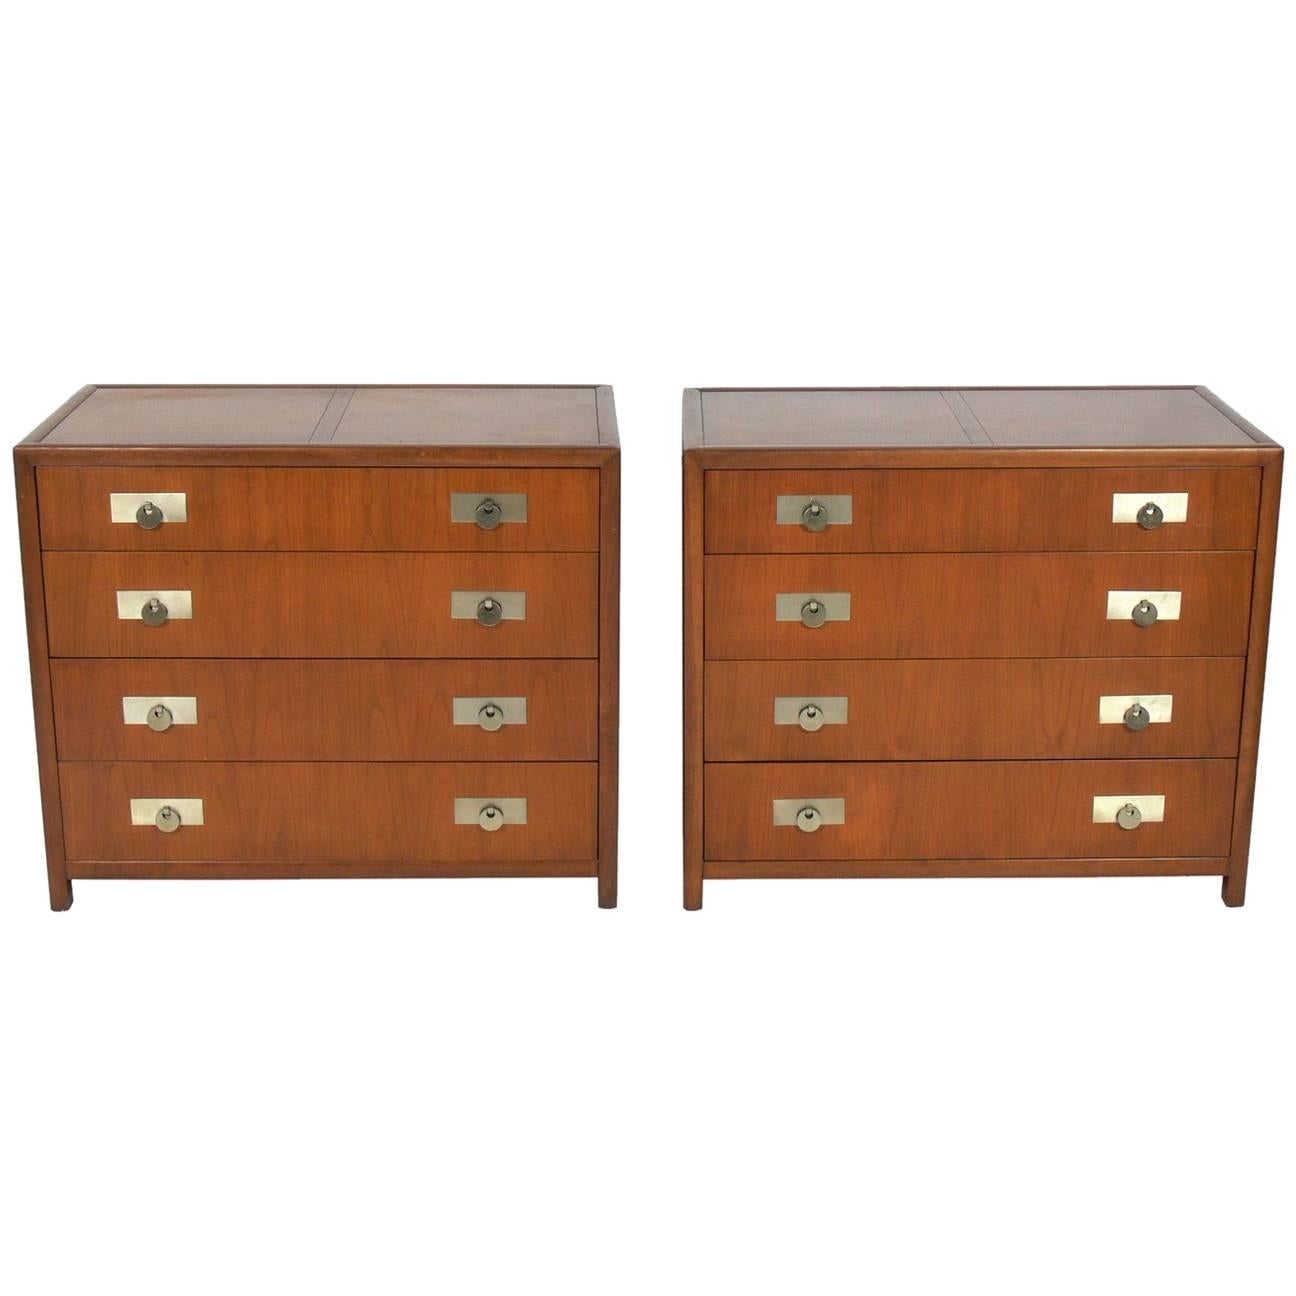 Pair of Asian Influenced Chests by Michael Taylor for Baker